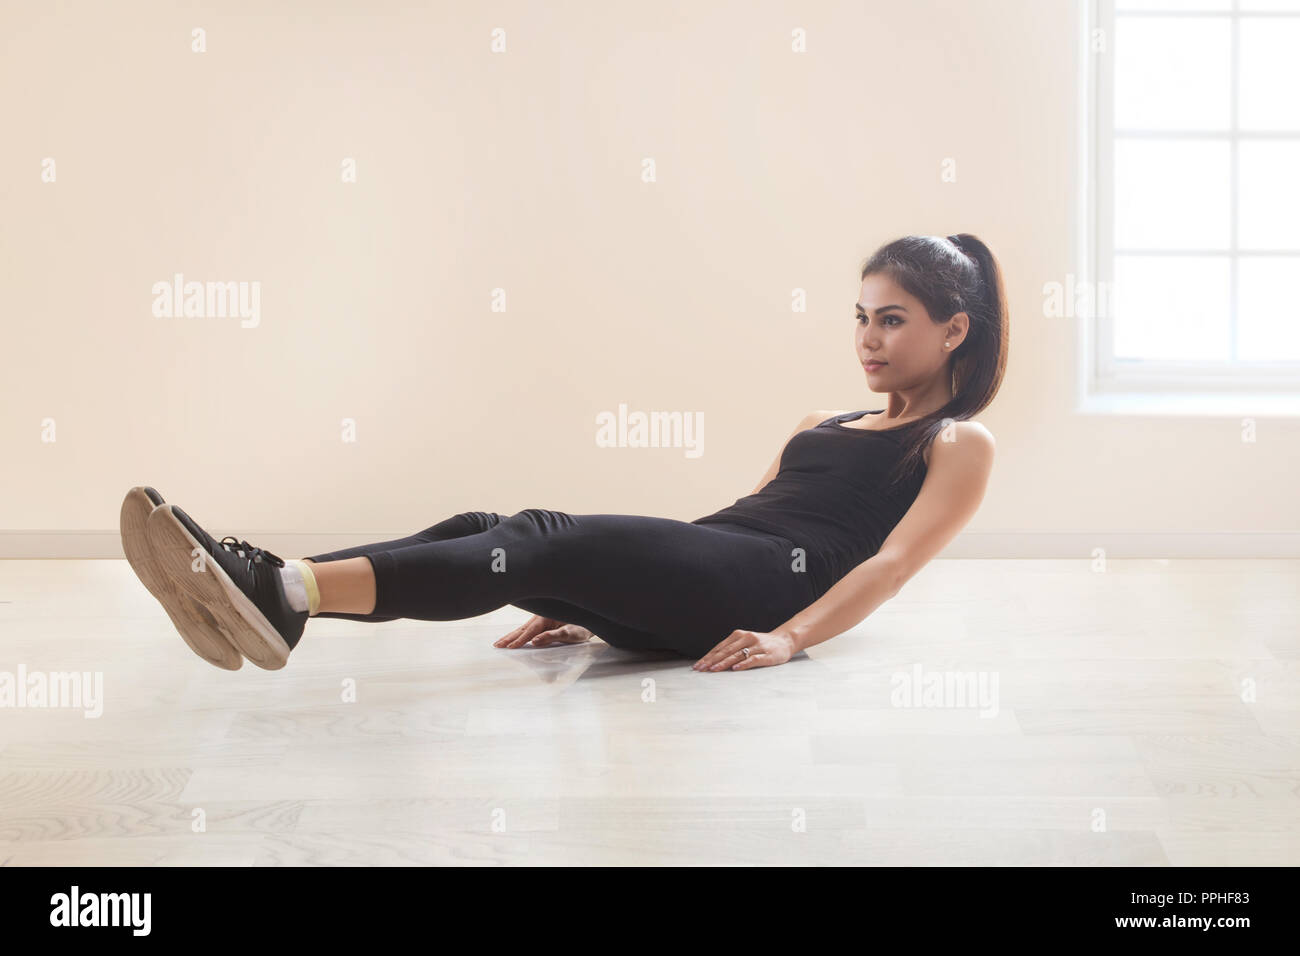 Young woman in workout clothes doing abs exercises on the floor. Stock Photo